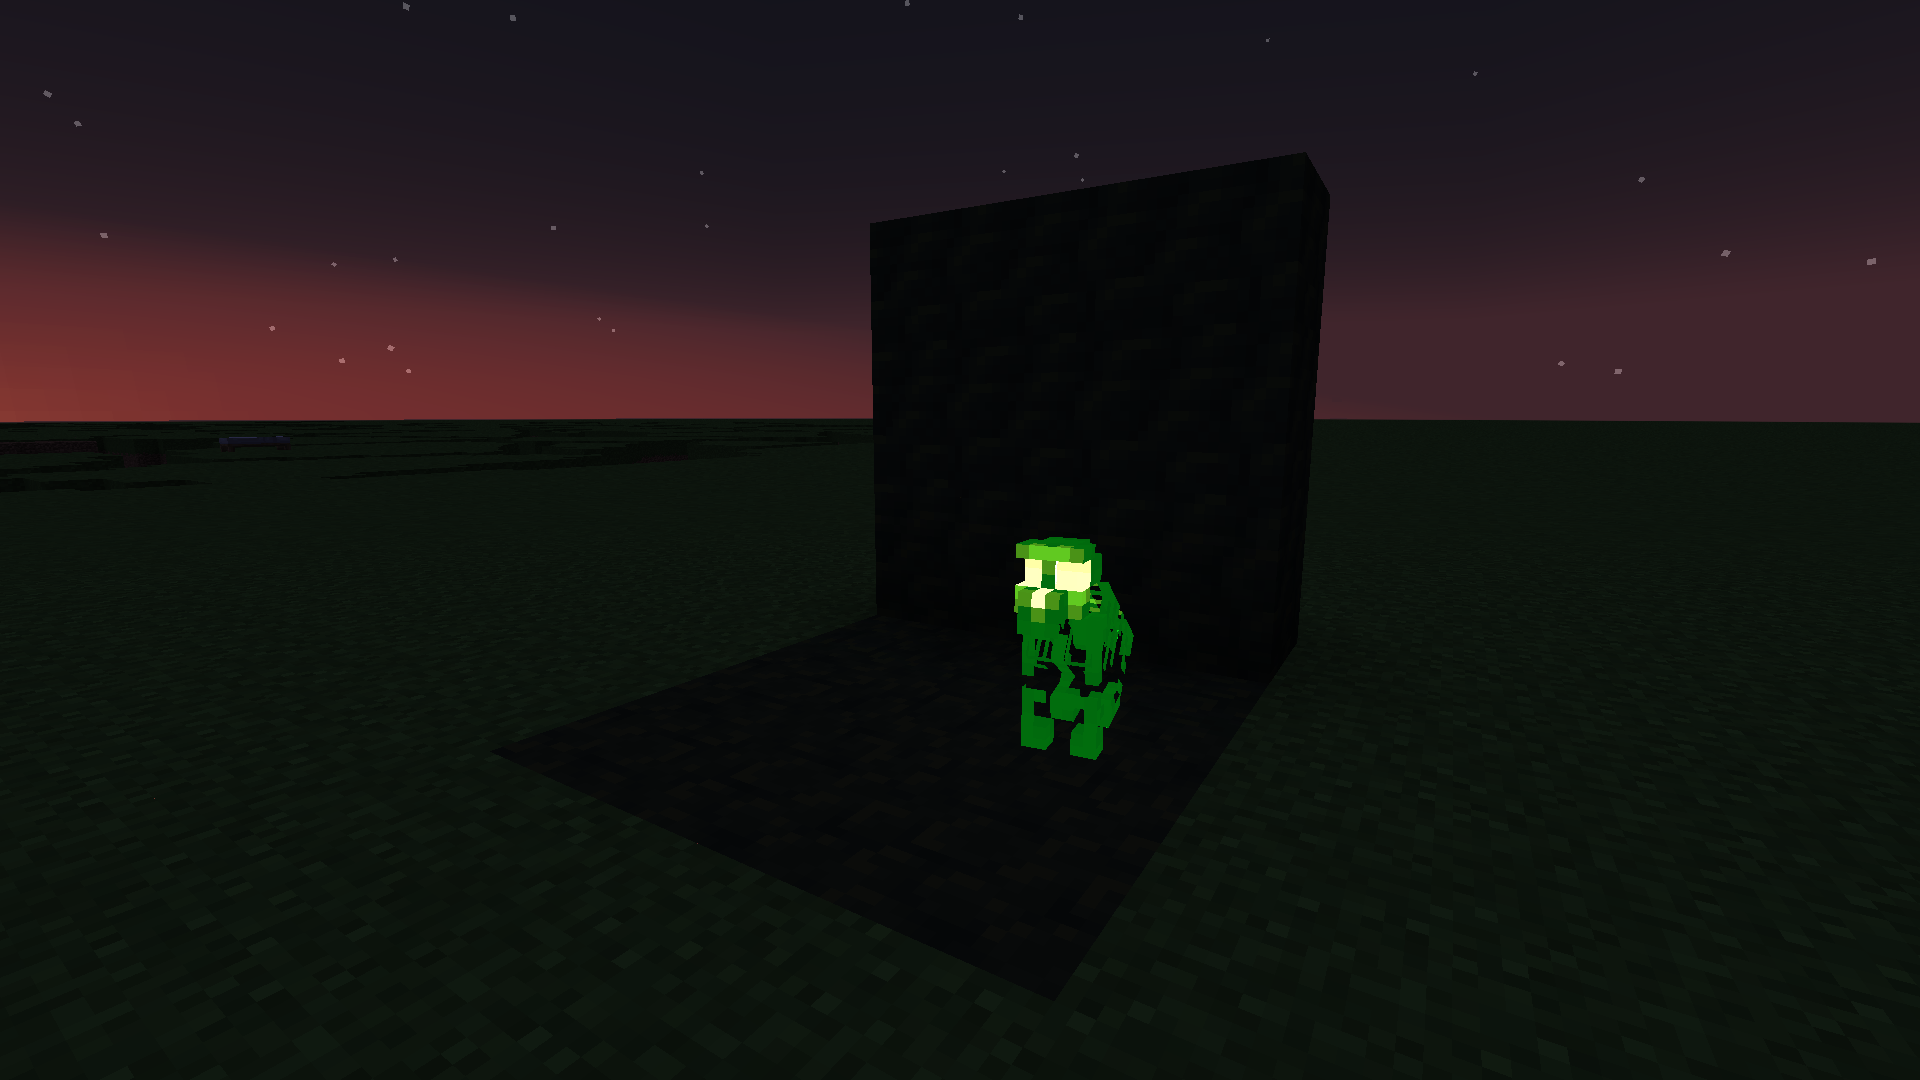 The glowing texture should somewhat help make it easier to find the cat in the darkness